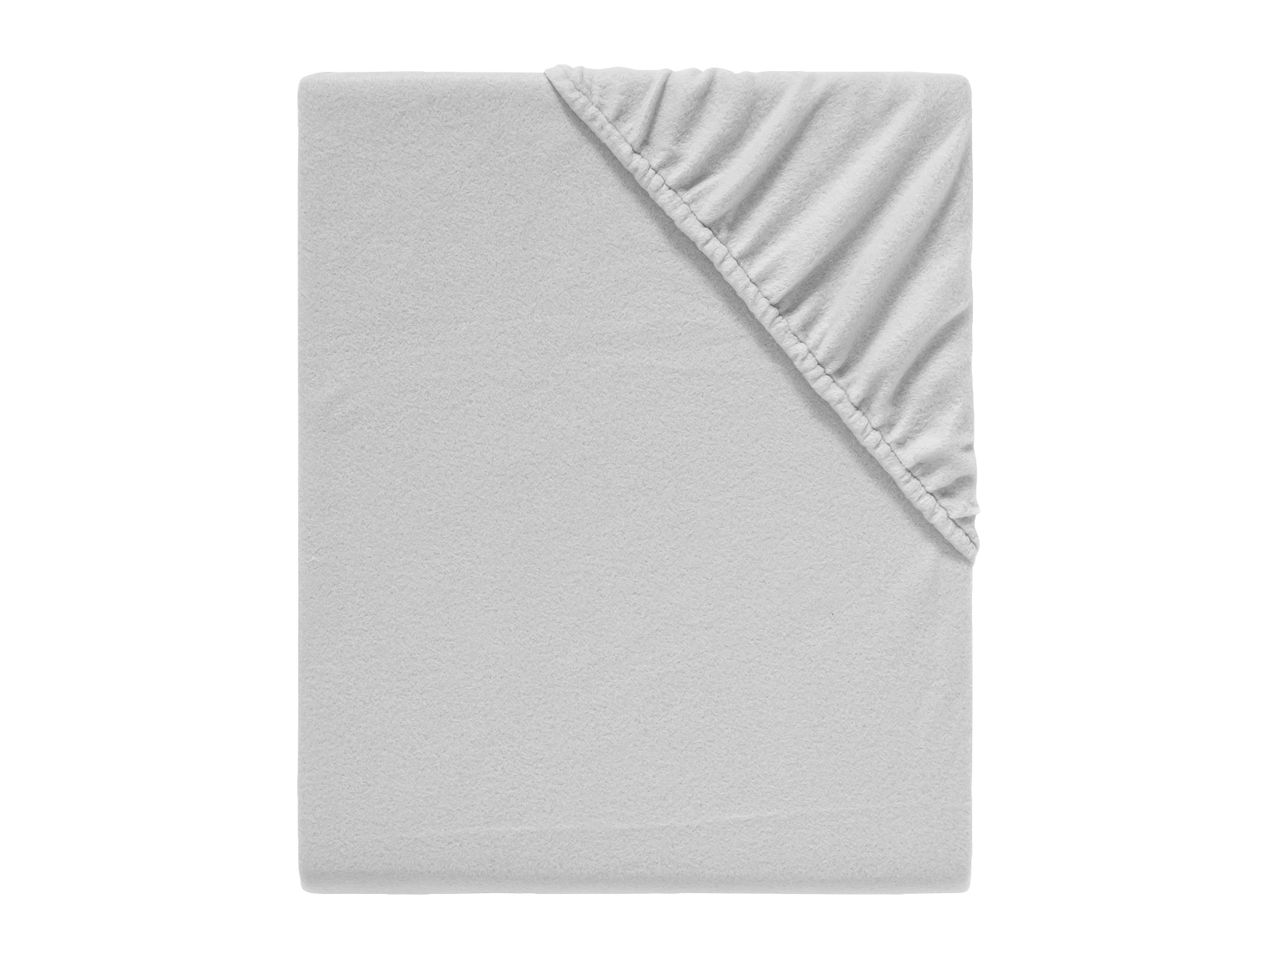 Go to full screen view: Livarno Home Fleece Fitted Sheet - Single - Image 2